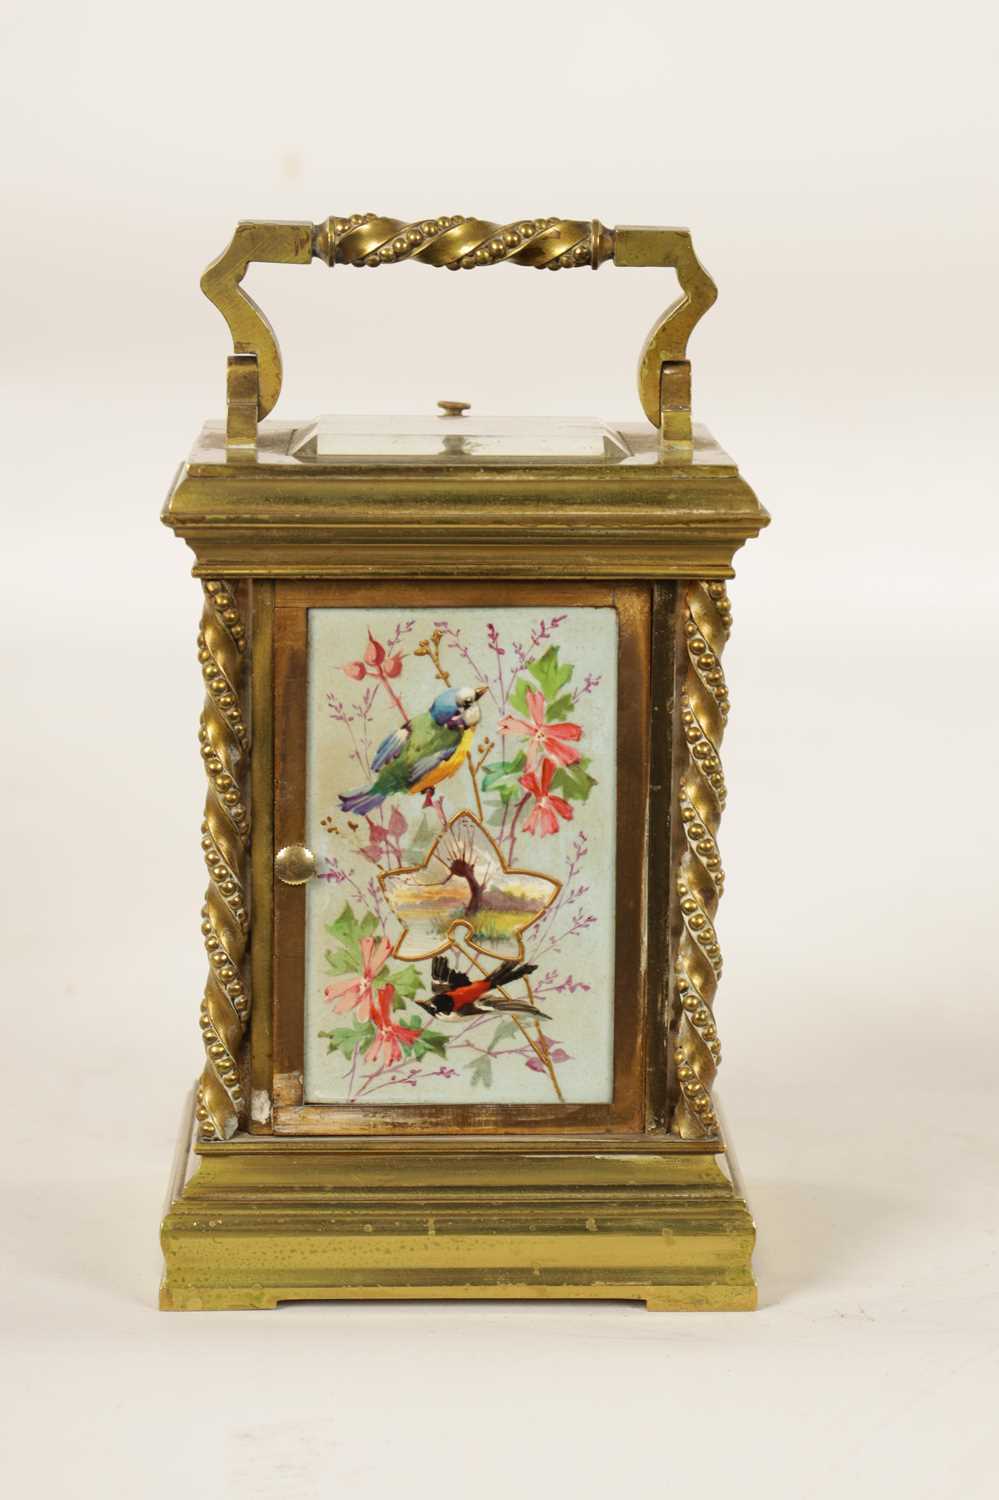 A LATE 19TH CENTURY FRENCH PORCELAIN PANELLED REPEATING CARRIAGE CLOCK - Image 4 of 7